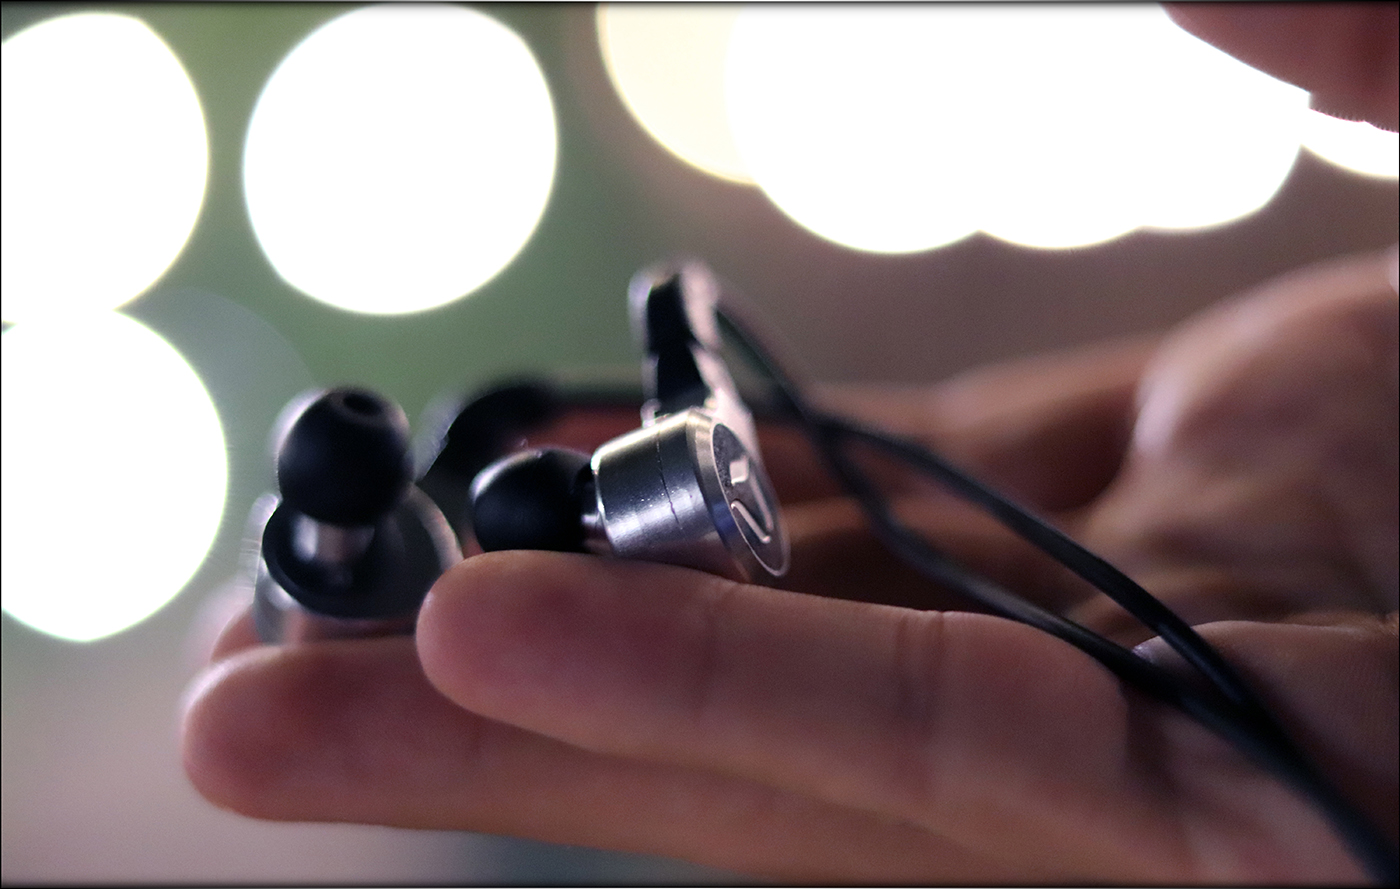 Dita-Fealty-IEMs-Earphones-Awesome-Cable-Dynamic-Driver-DD-Review-Audiophile-Heaven-25.jpg